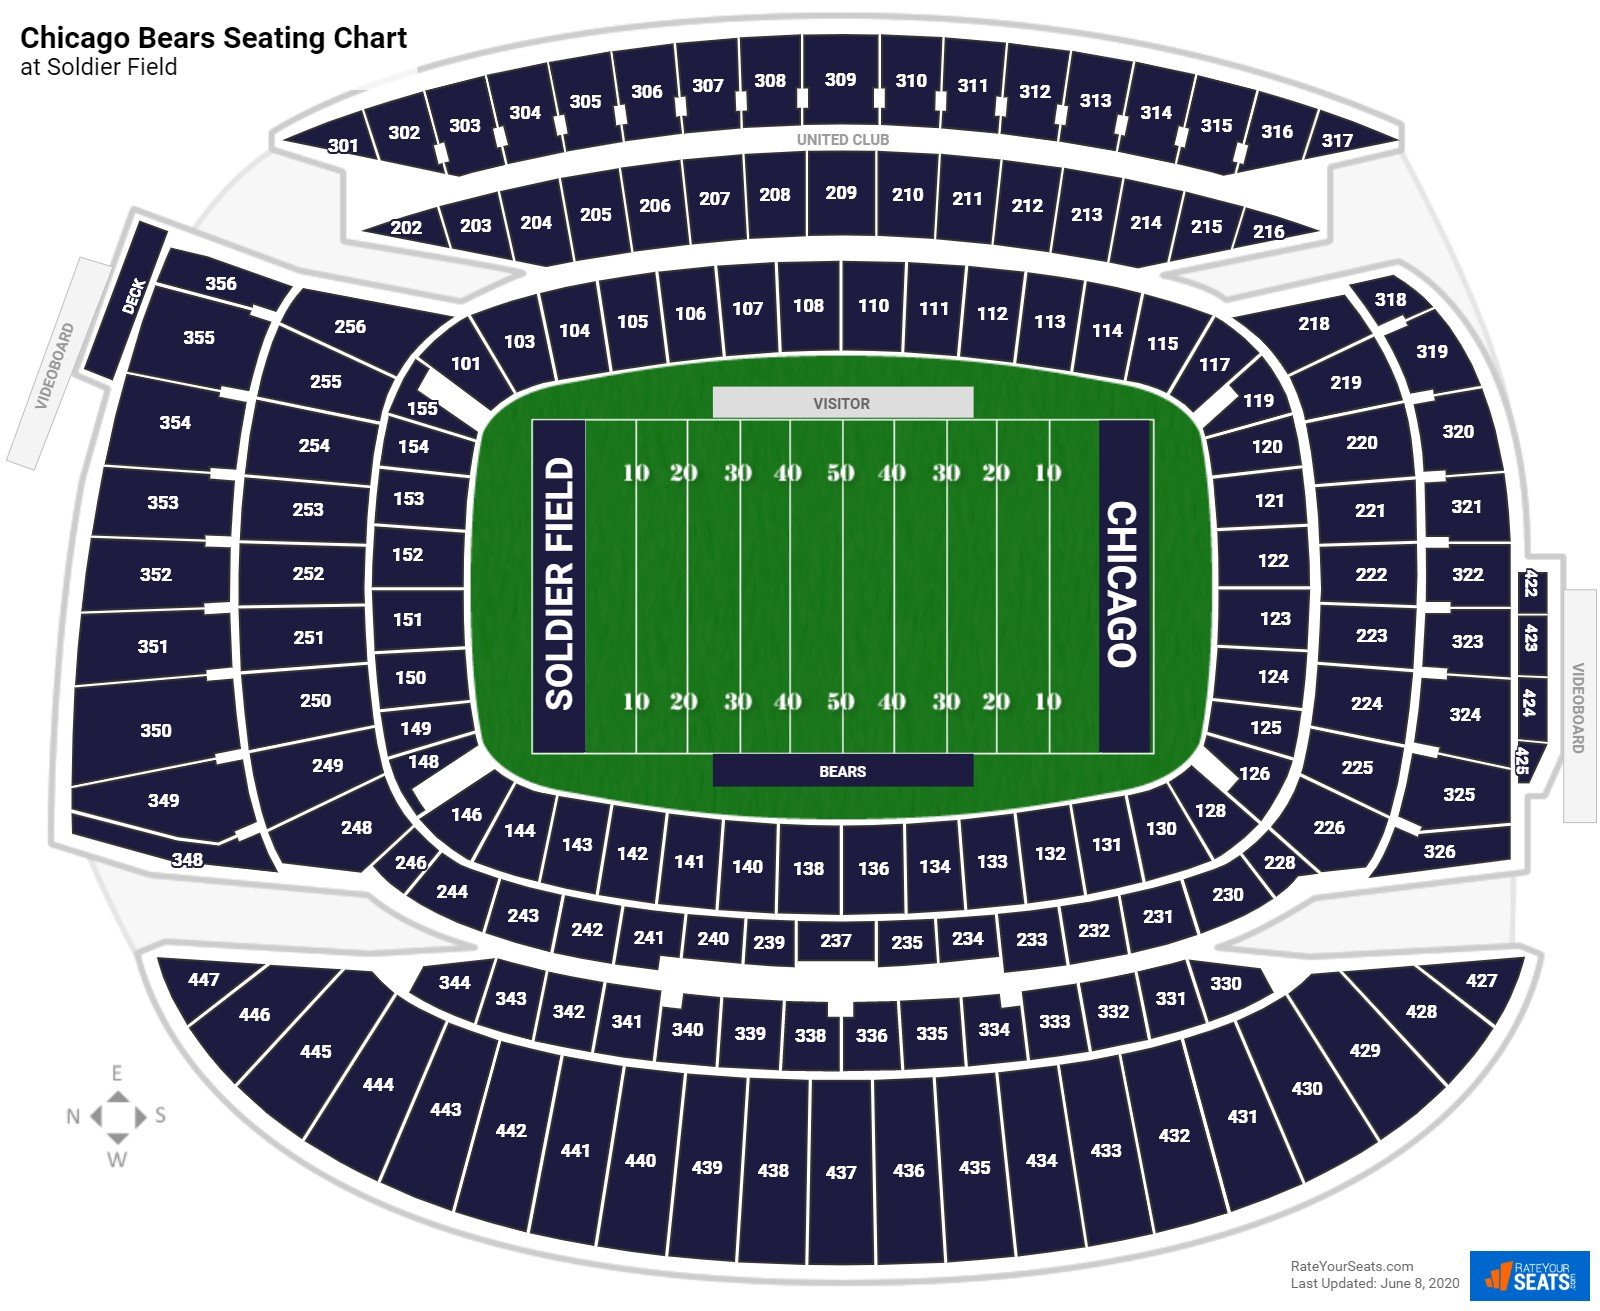 Chicago Bears Seating Chart At Soldier Field 